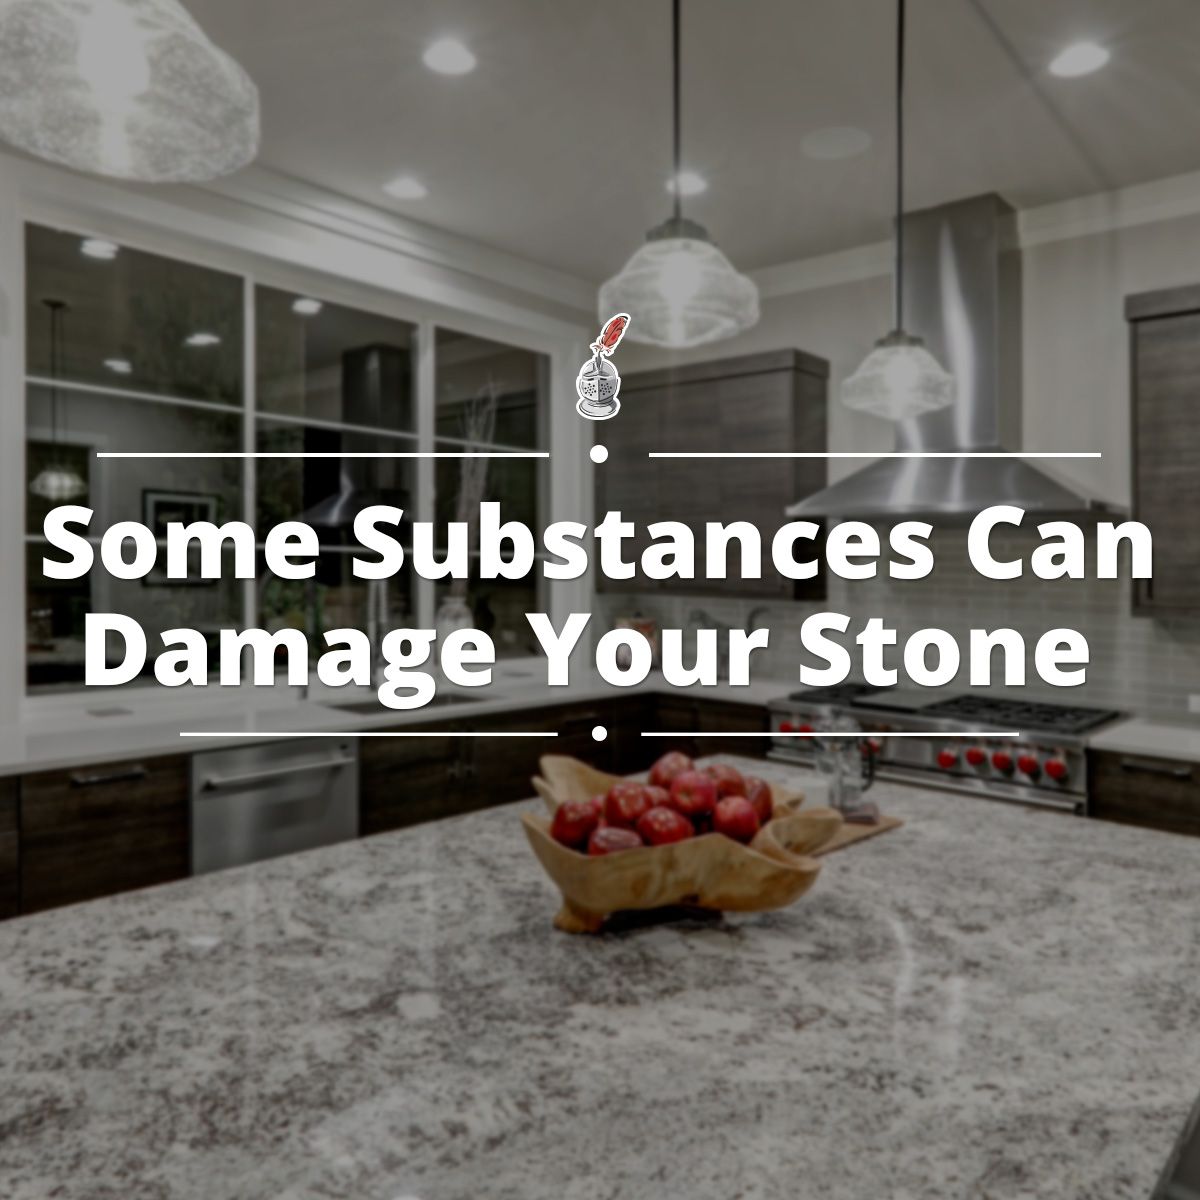 Some Substances Can Damage Your Stone